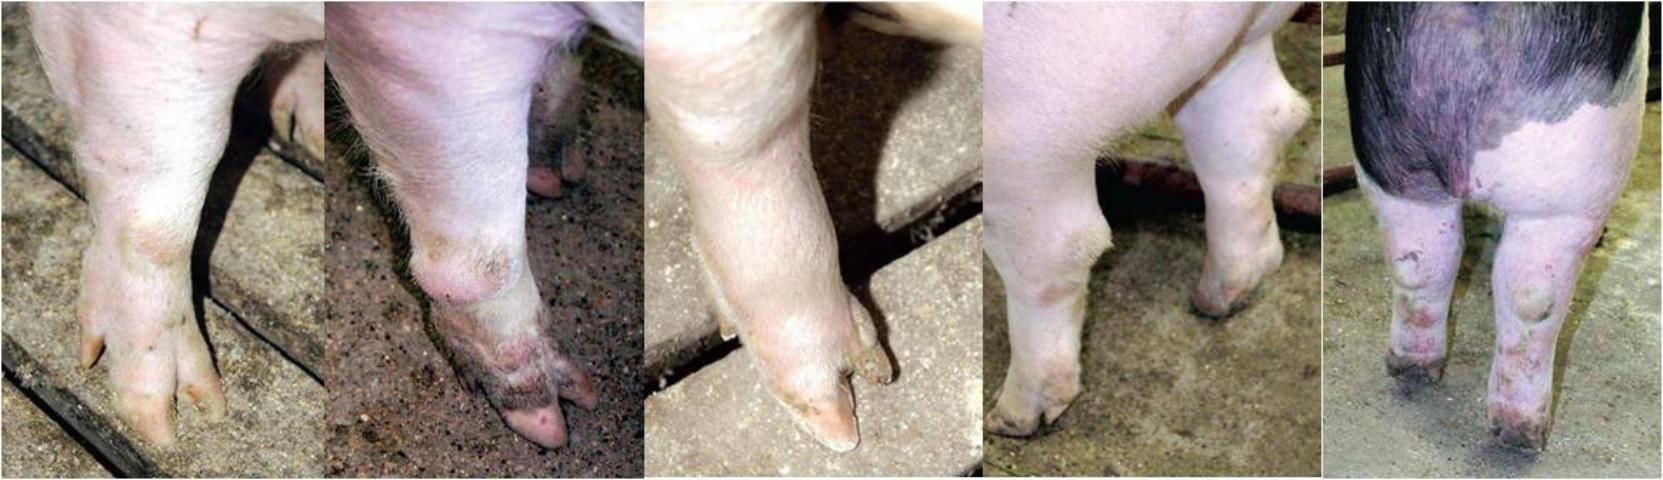 Figure 12. From left to right: a foot with even-sized toes and a slight spread; a foot with an ulceration above the toe and swelling around the knee; a foot with a much smaller inside toe; this hock shows swelling on the right hock; this hock shows swelling on the inside left hock.